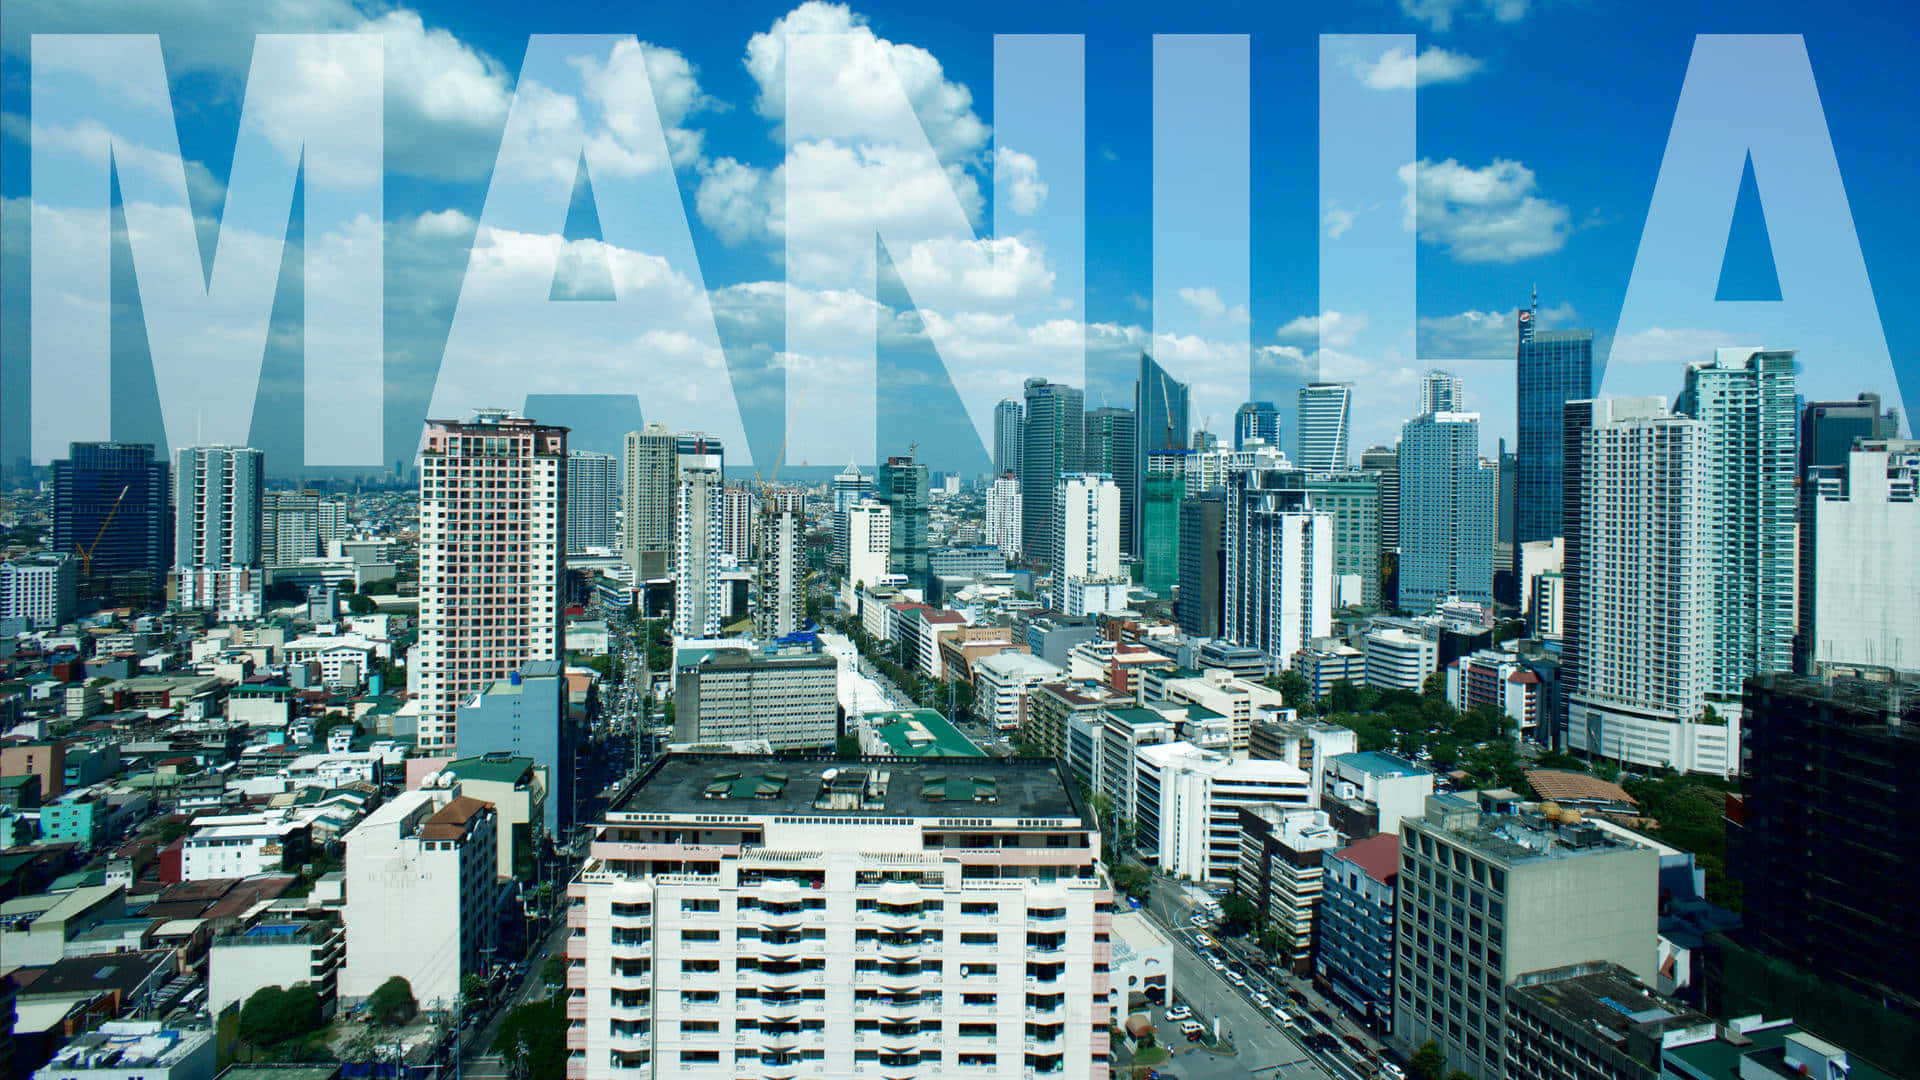 A Cityscape With The Word Manila On It